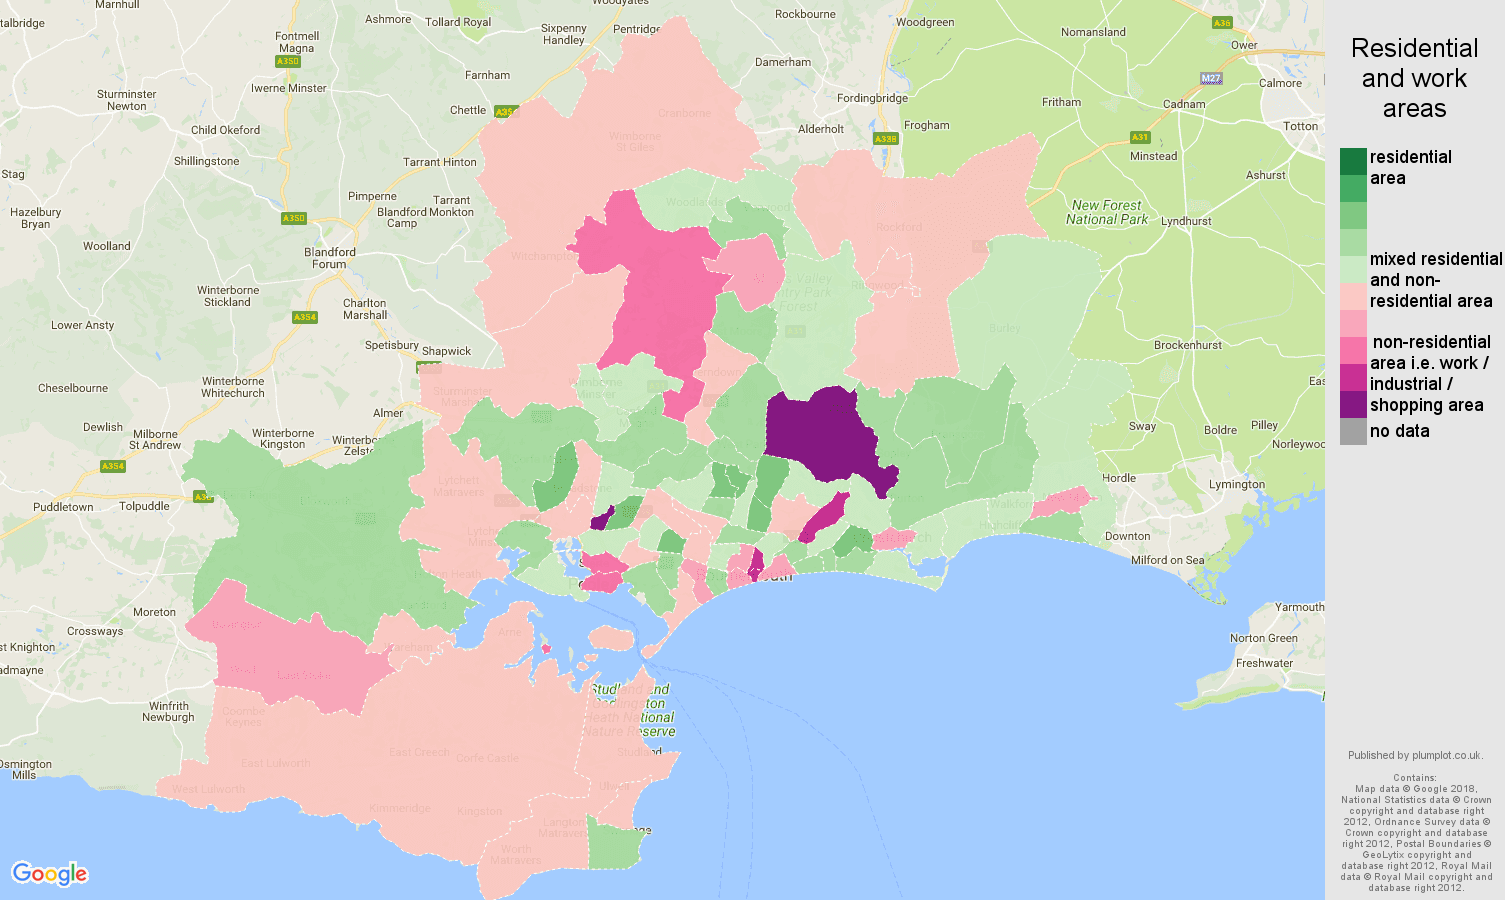 Bournemouth residential areas map